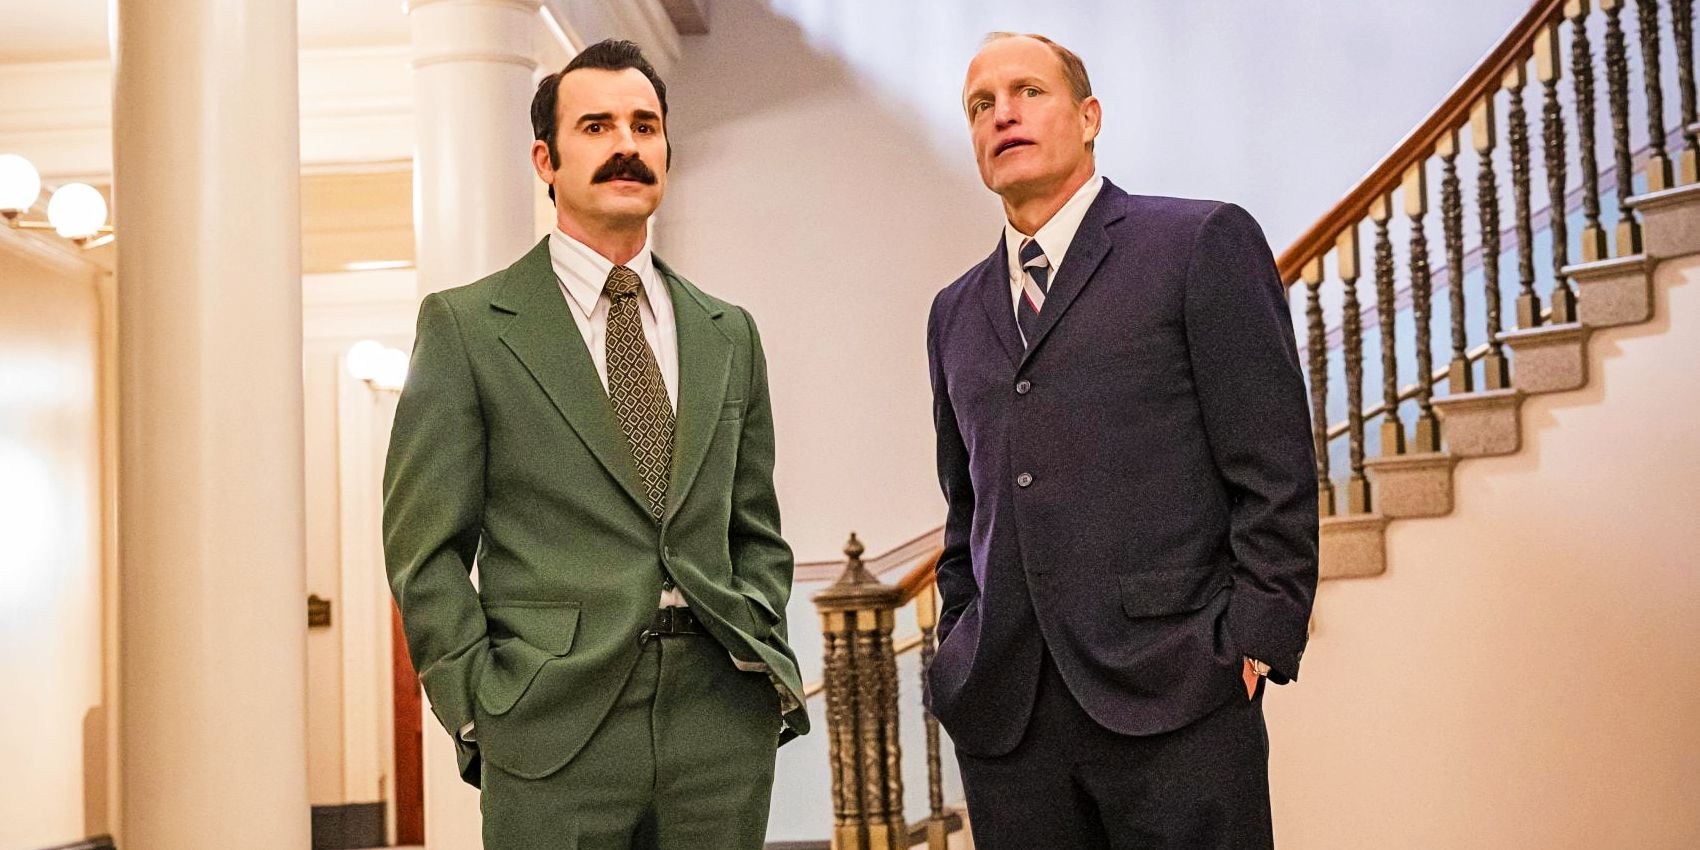 Justin Theroux as G Gordon Liddy and Woody Harrelson as E Howard Hunt standing together in White House Plumbers